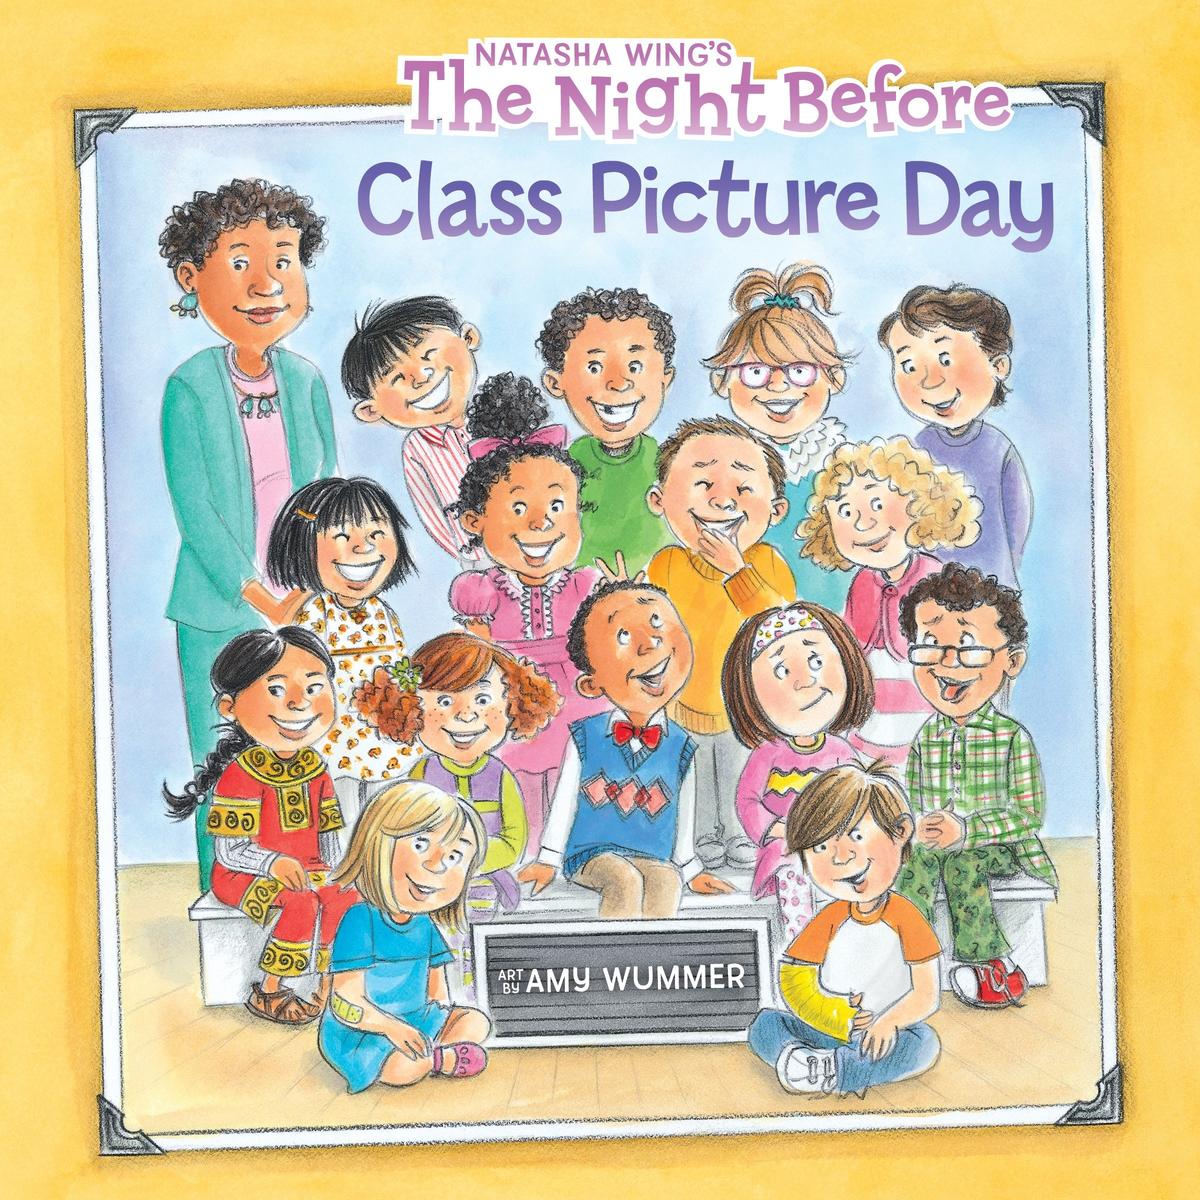 The Night Before Class Picture Day